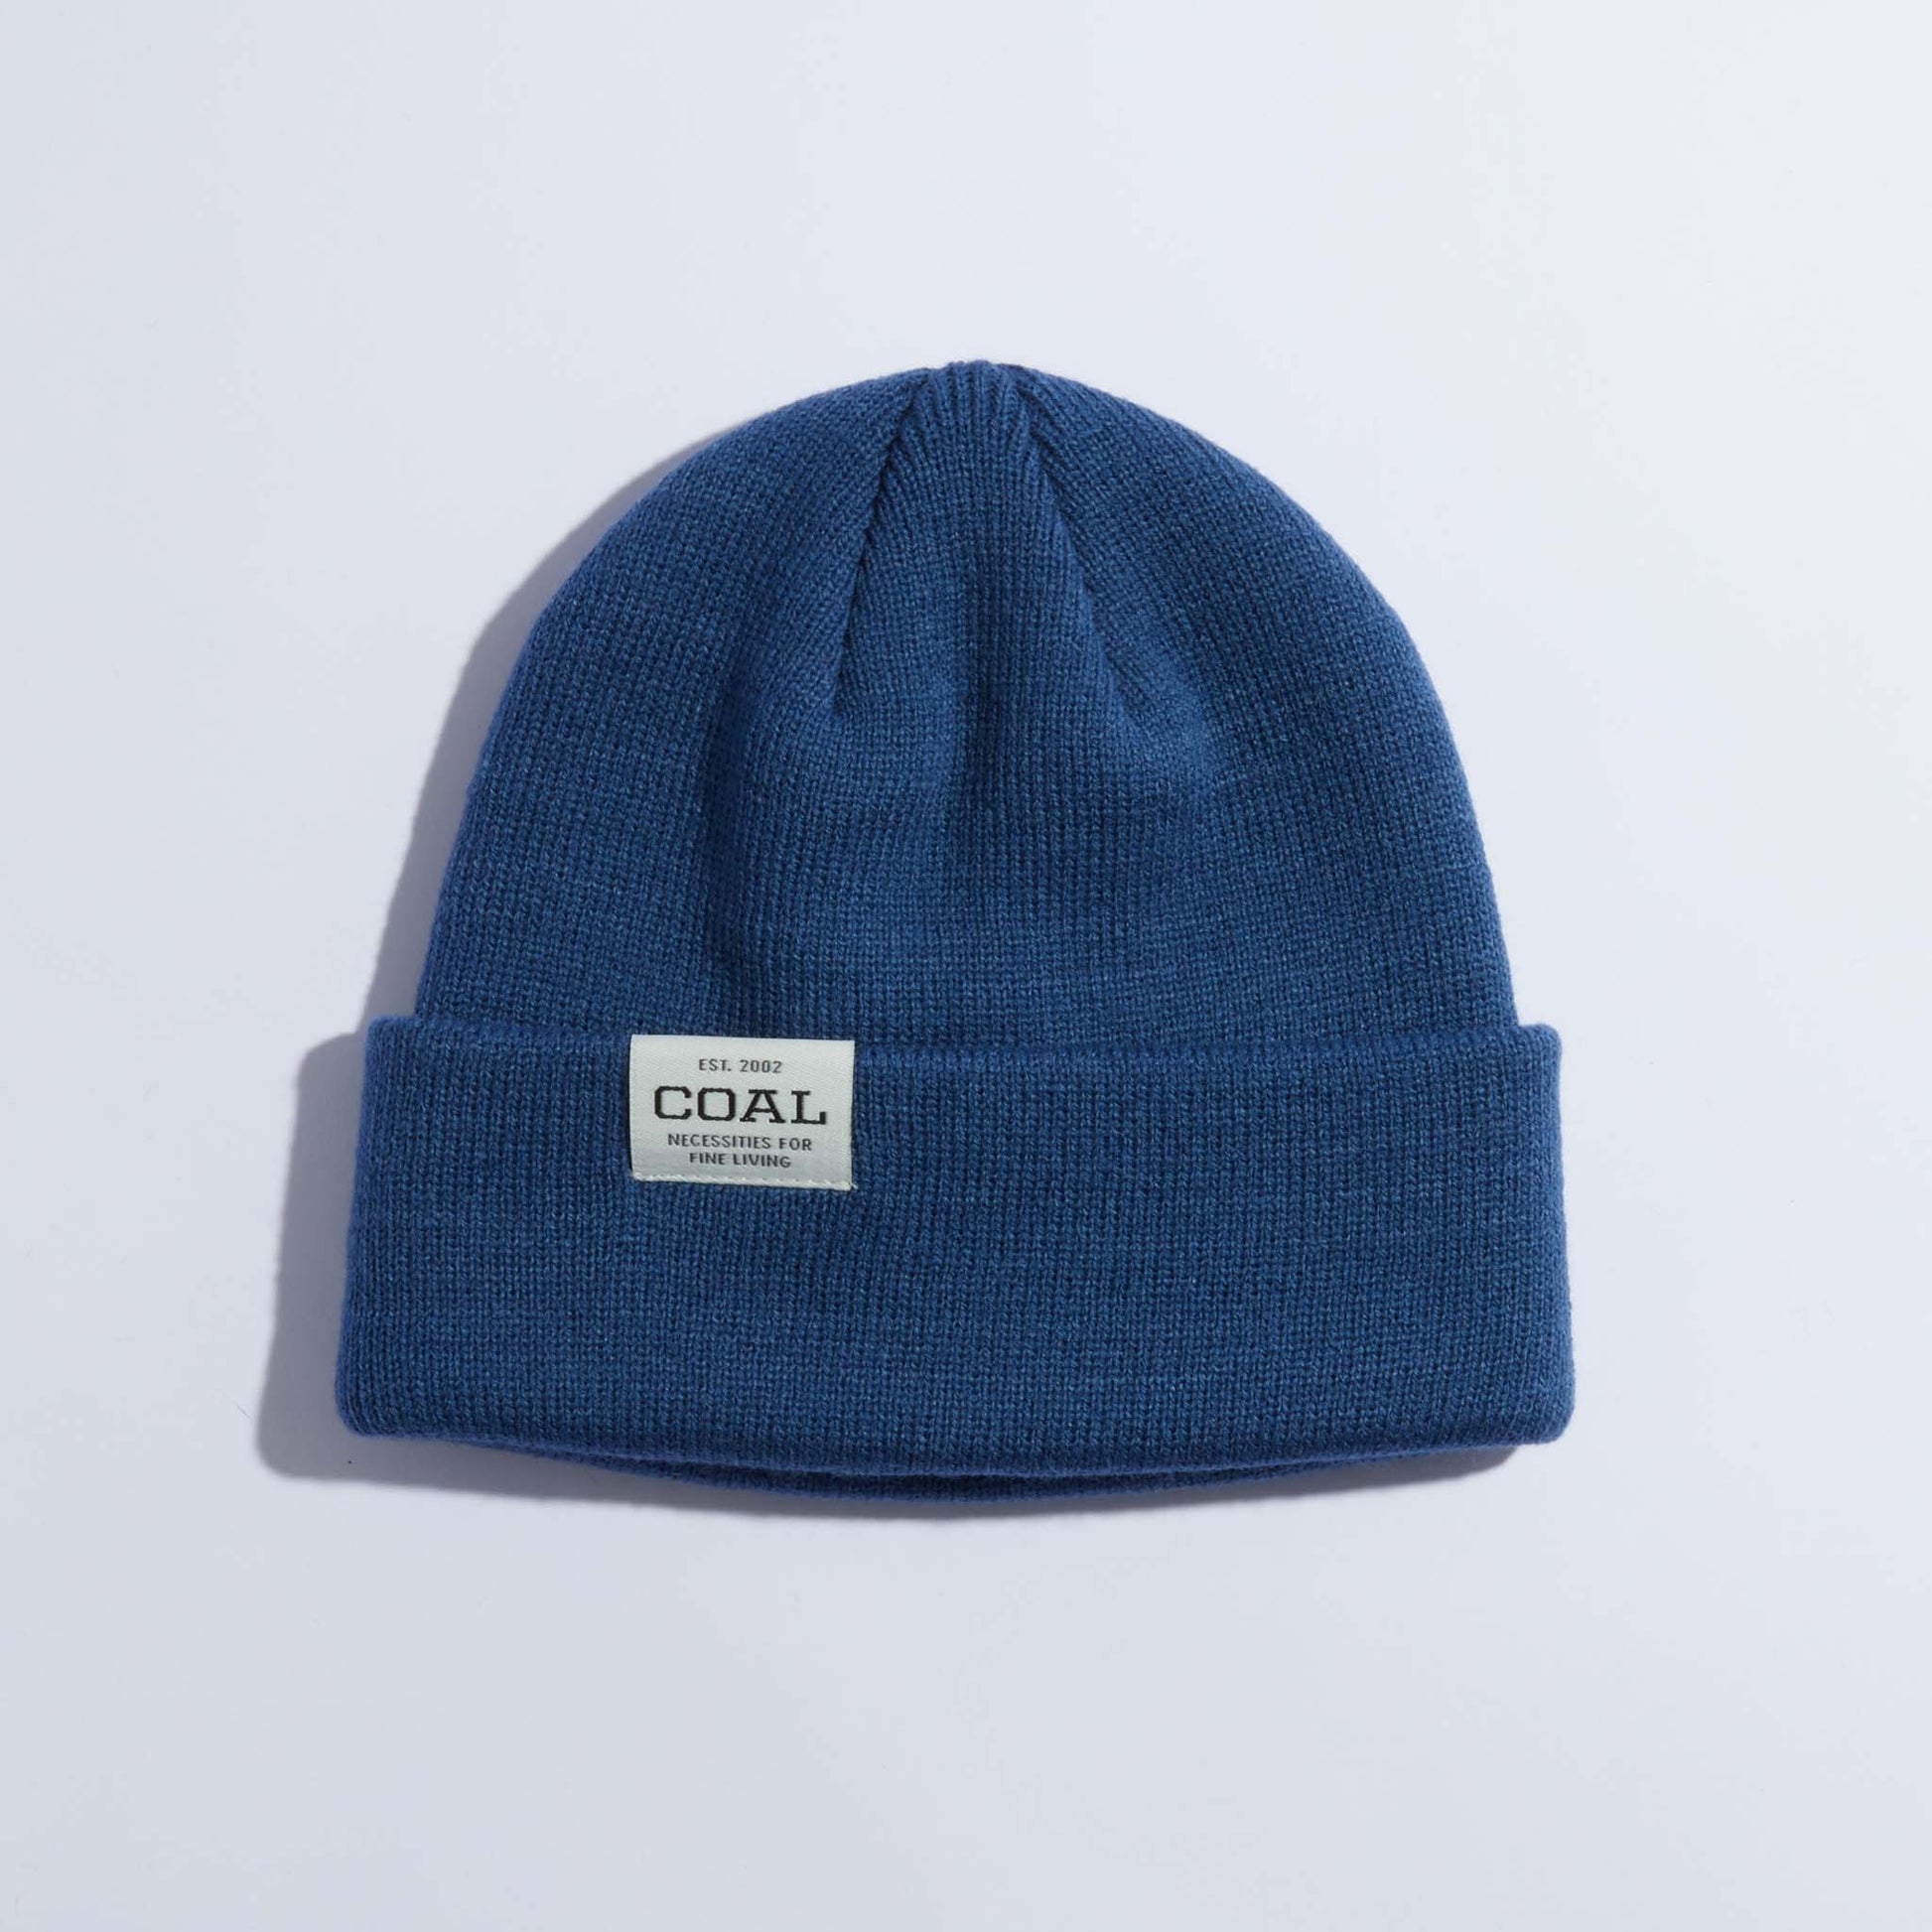 The Uniform Low Recycled Knit Cuff Beanie